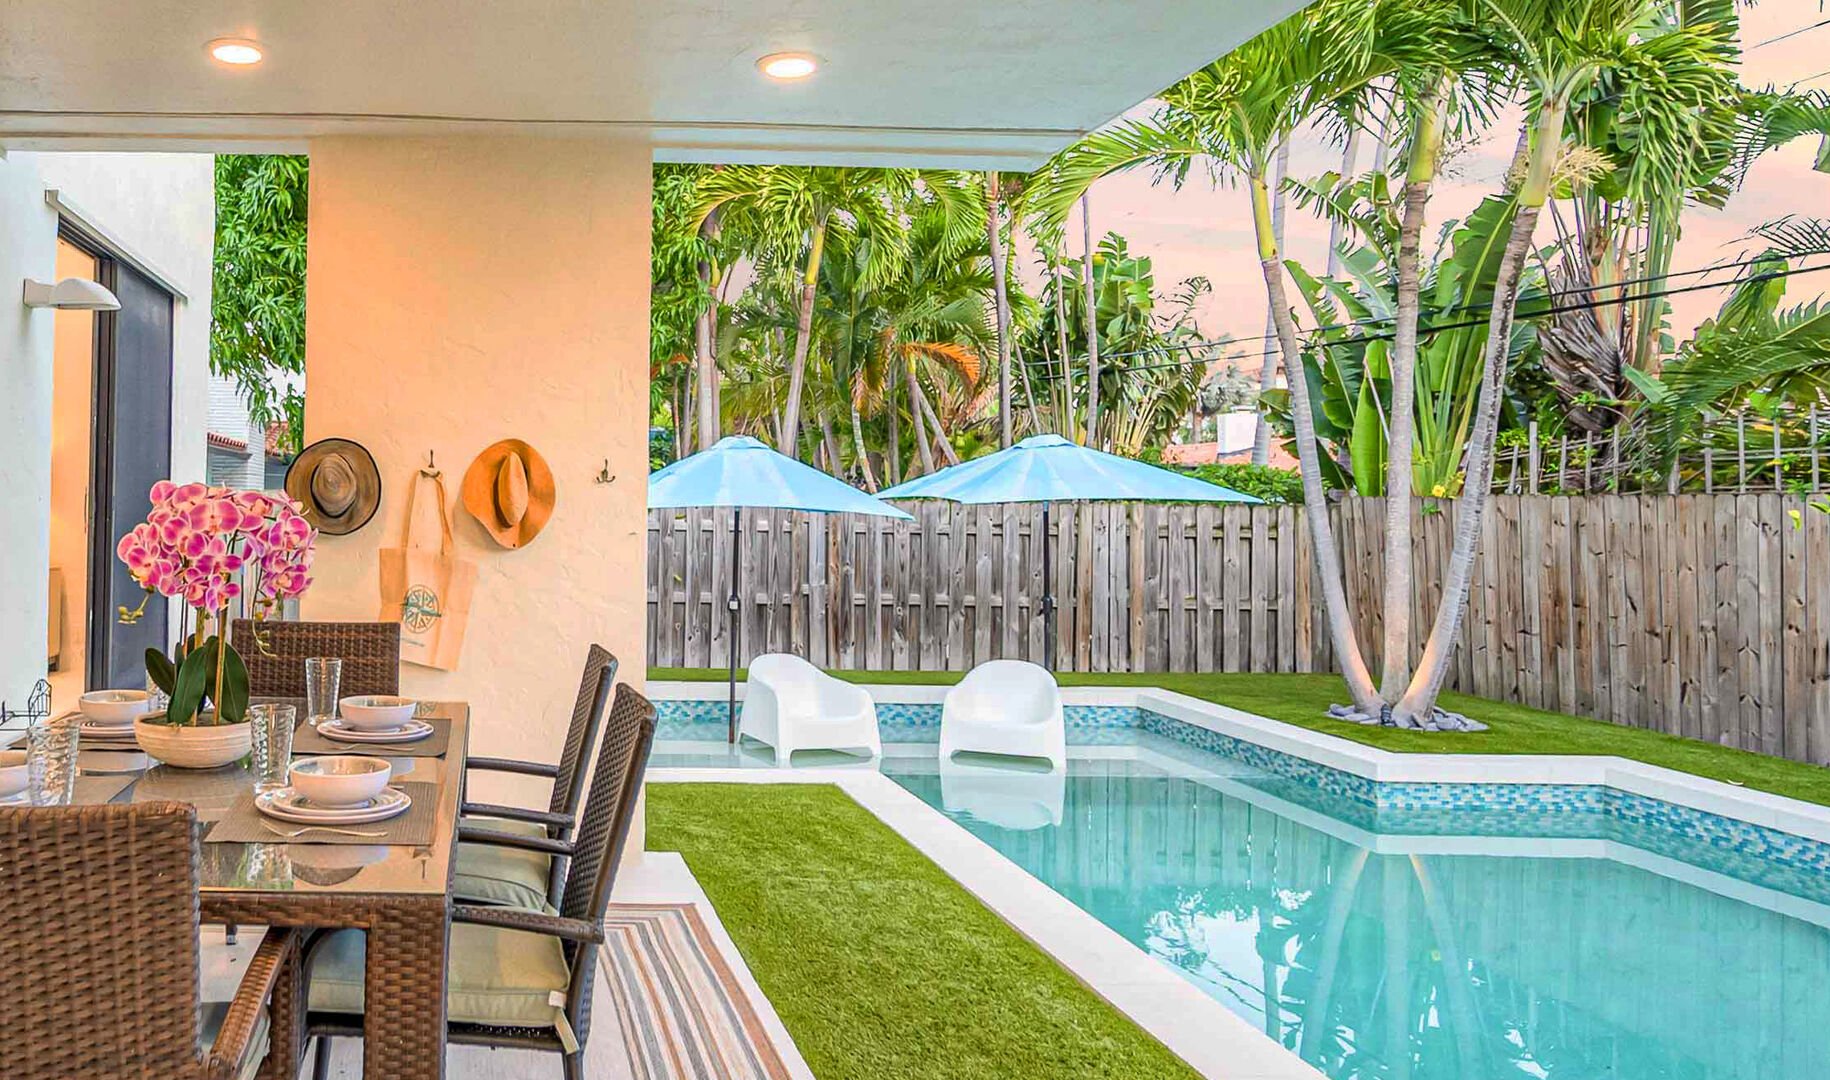 Outside you will enjoy a covered patio with a dining table. The private garden features a heated pool with lounges and al fresco dining.